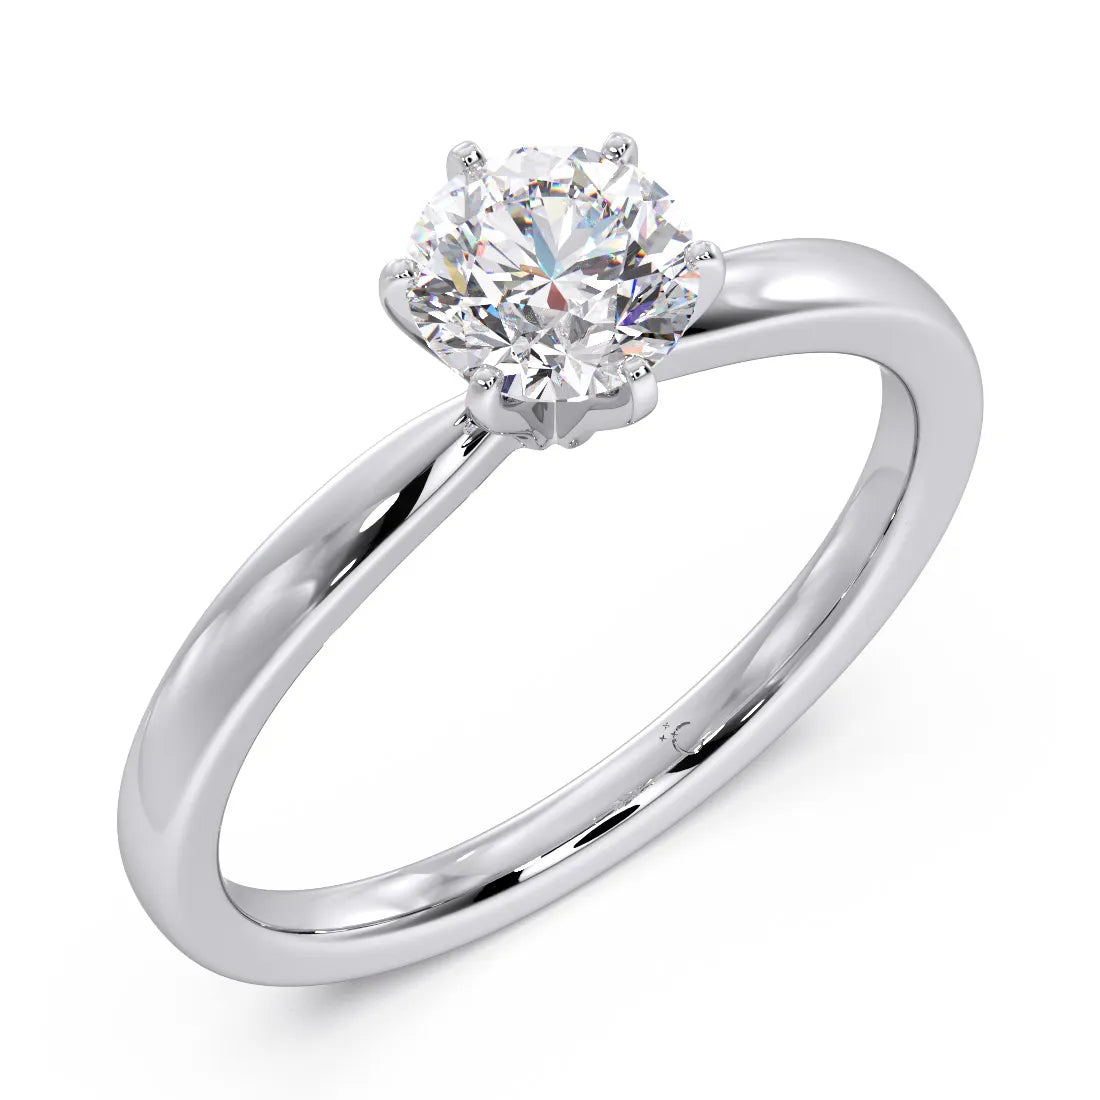 SOLITAIRE RING WITH 0.50 CRT DIAMOND